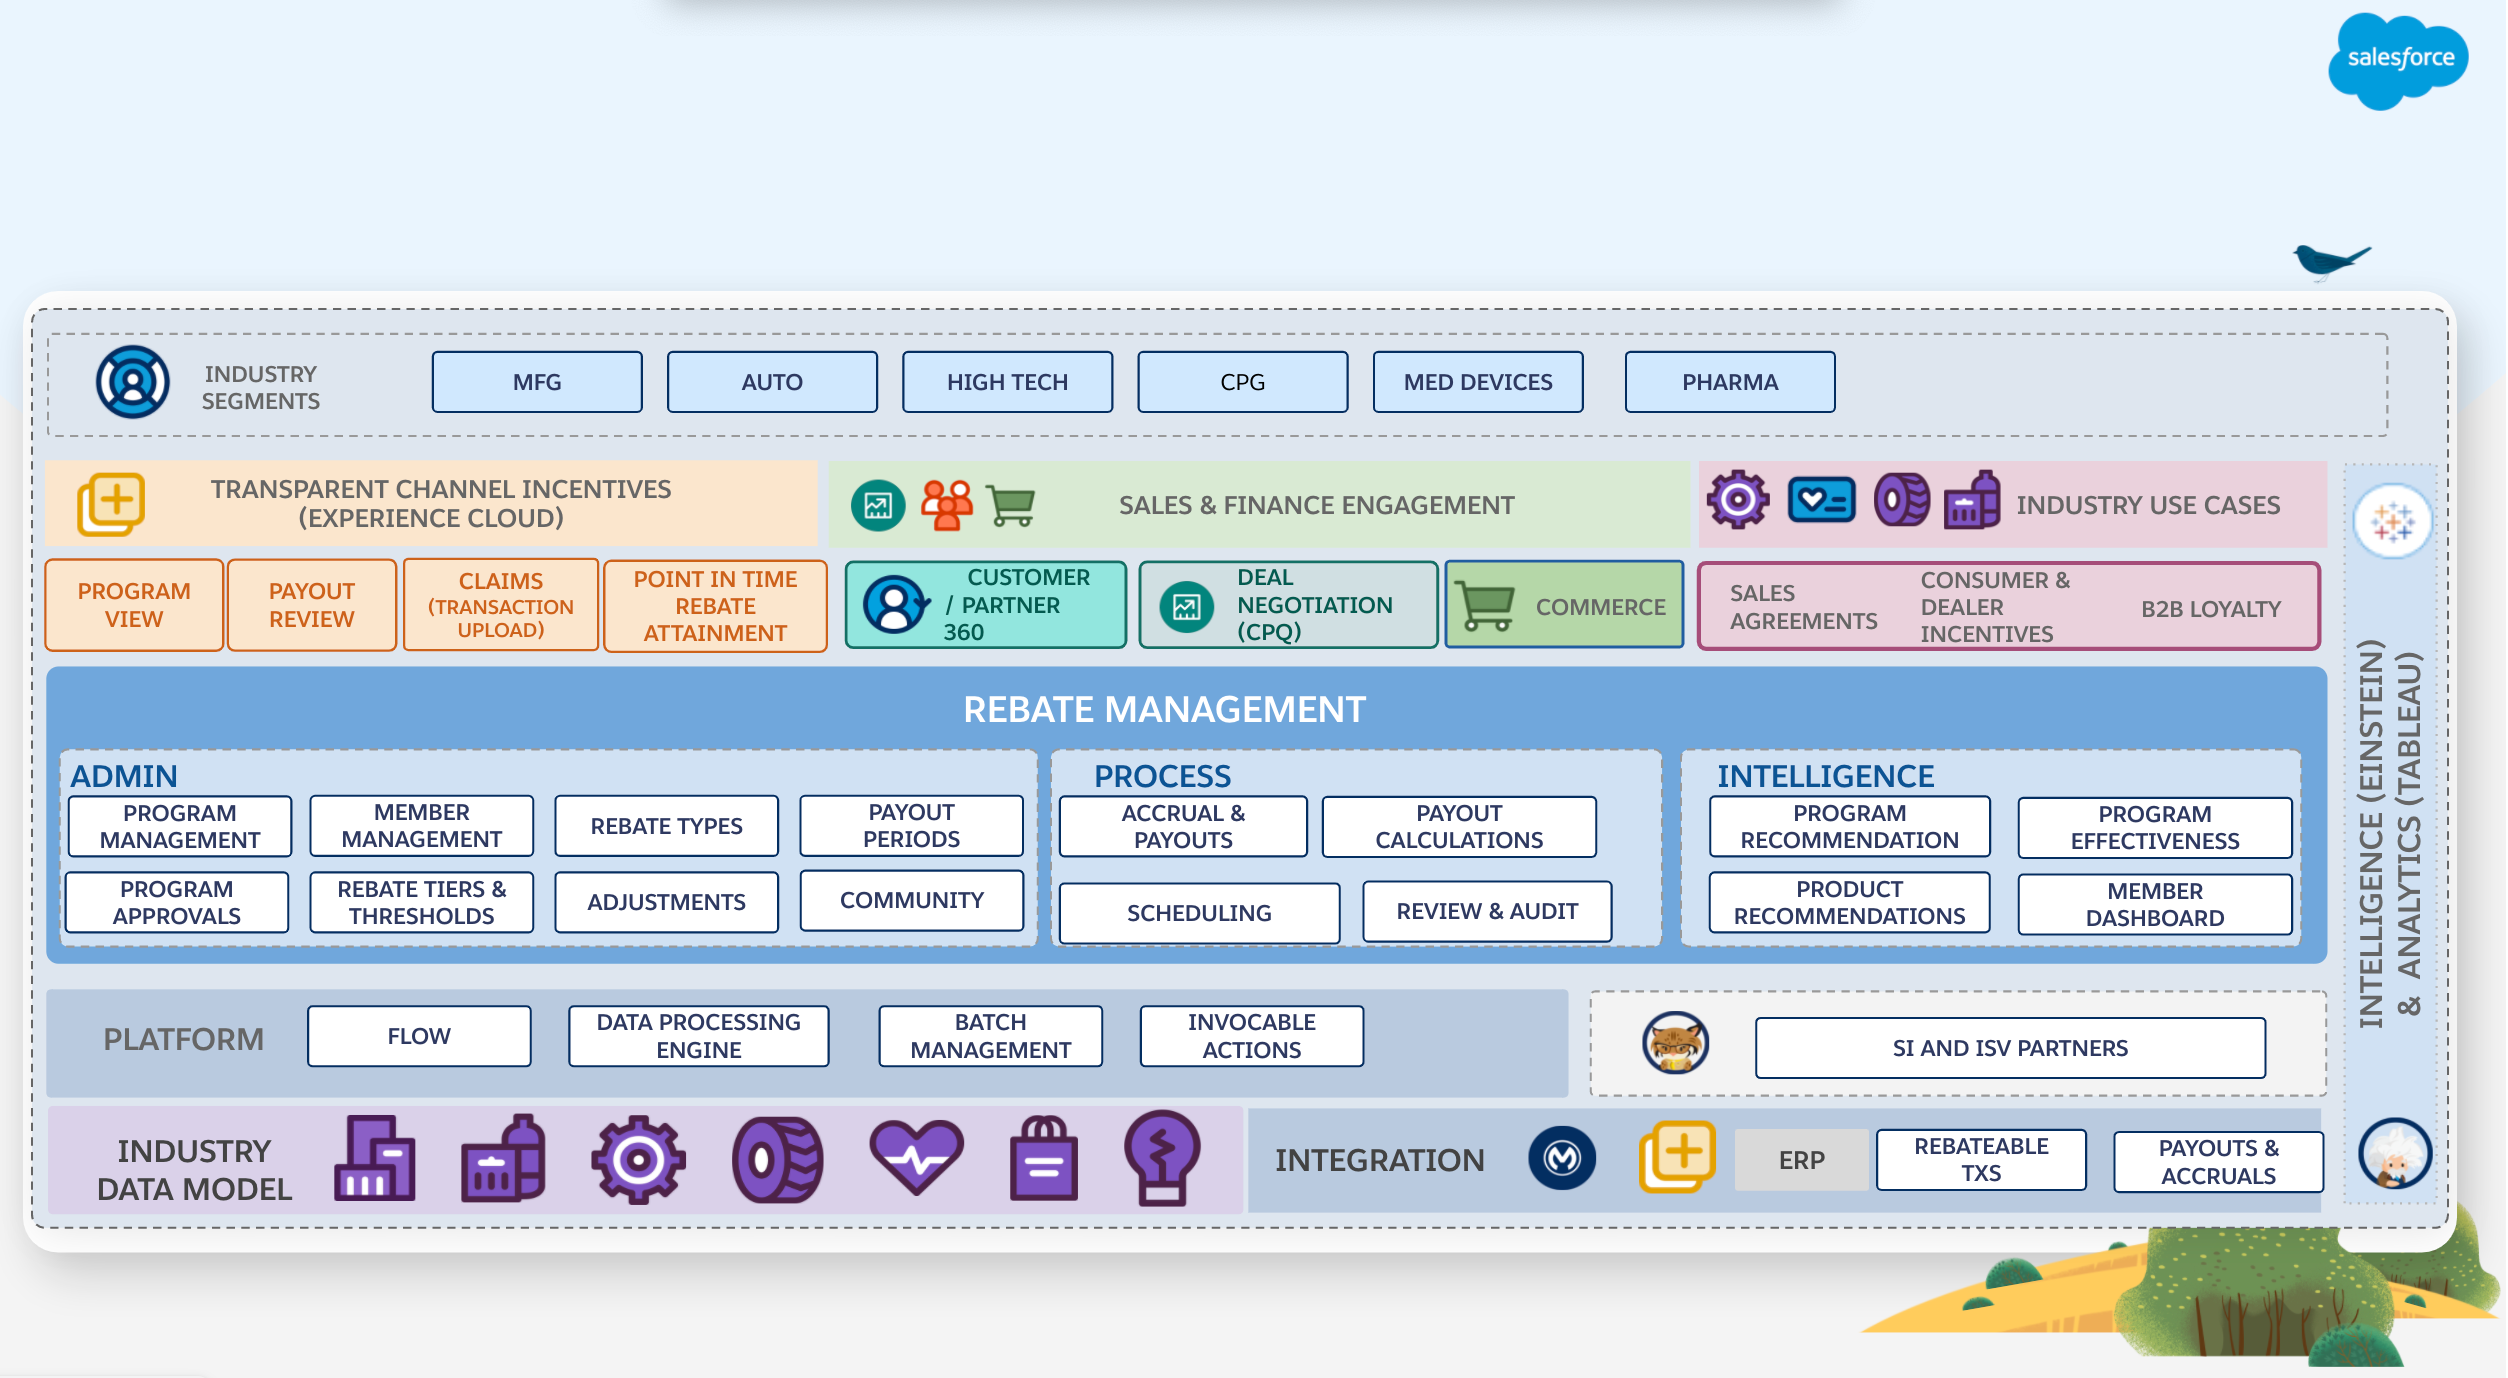 manufacturing-cloud-with-rebate-management-learning-map